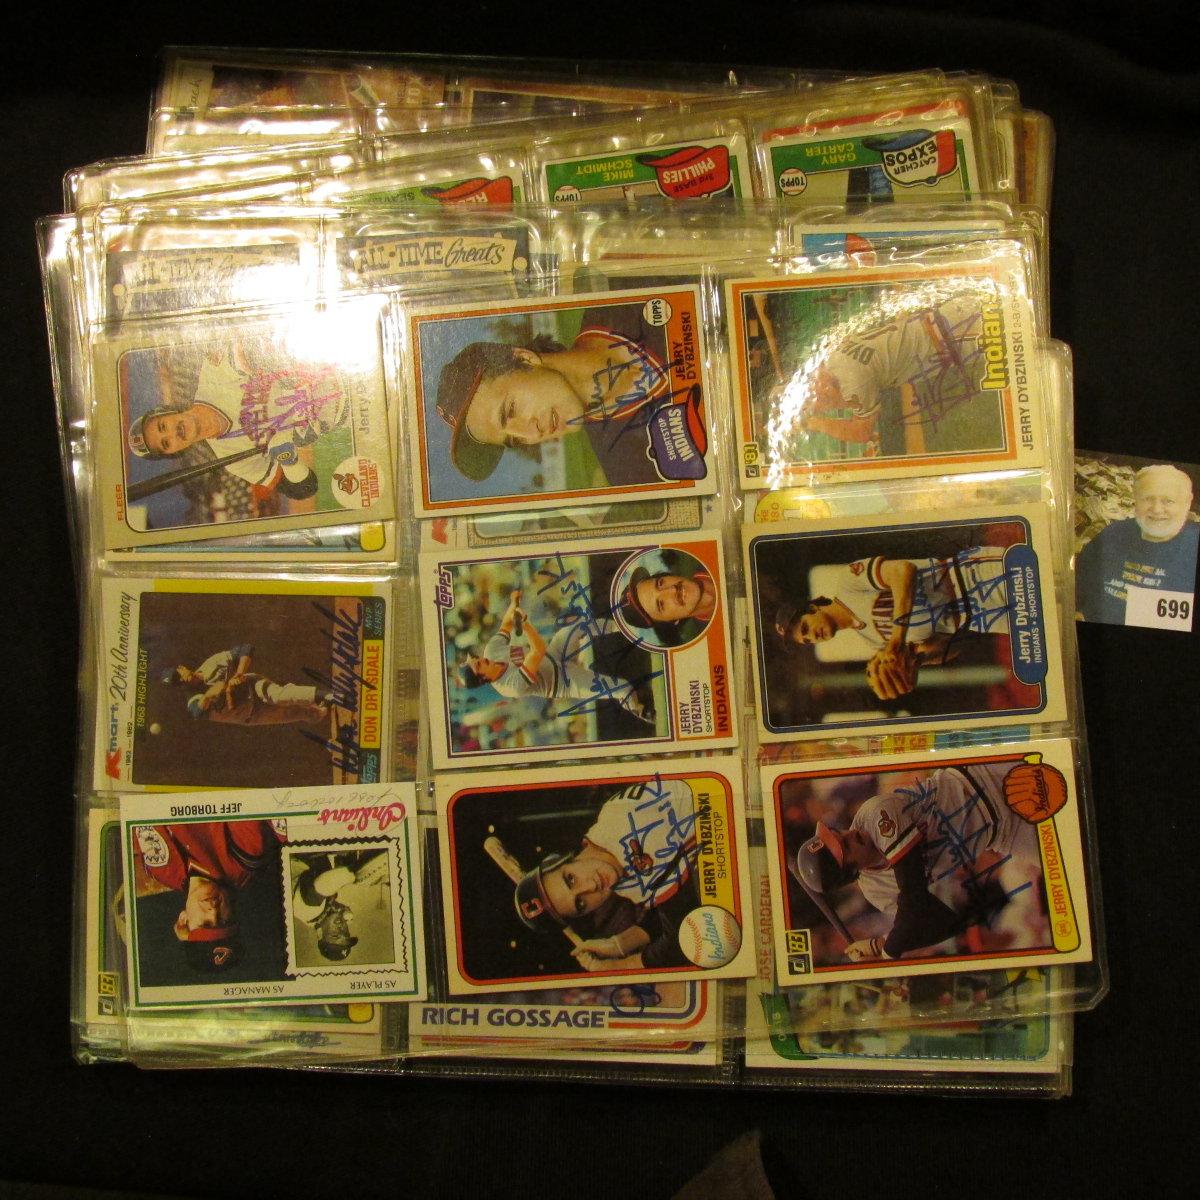 A group of more than (20) Plastic pages with Baseball Cards, some of which have been autographed. A